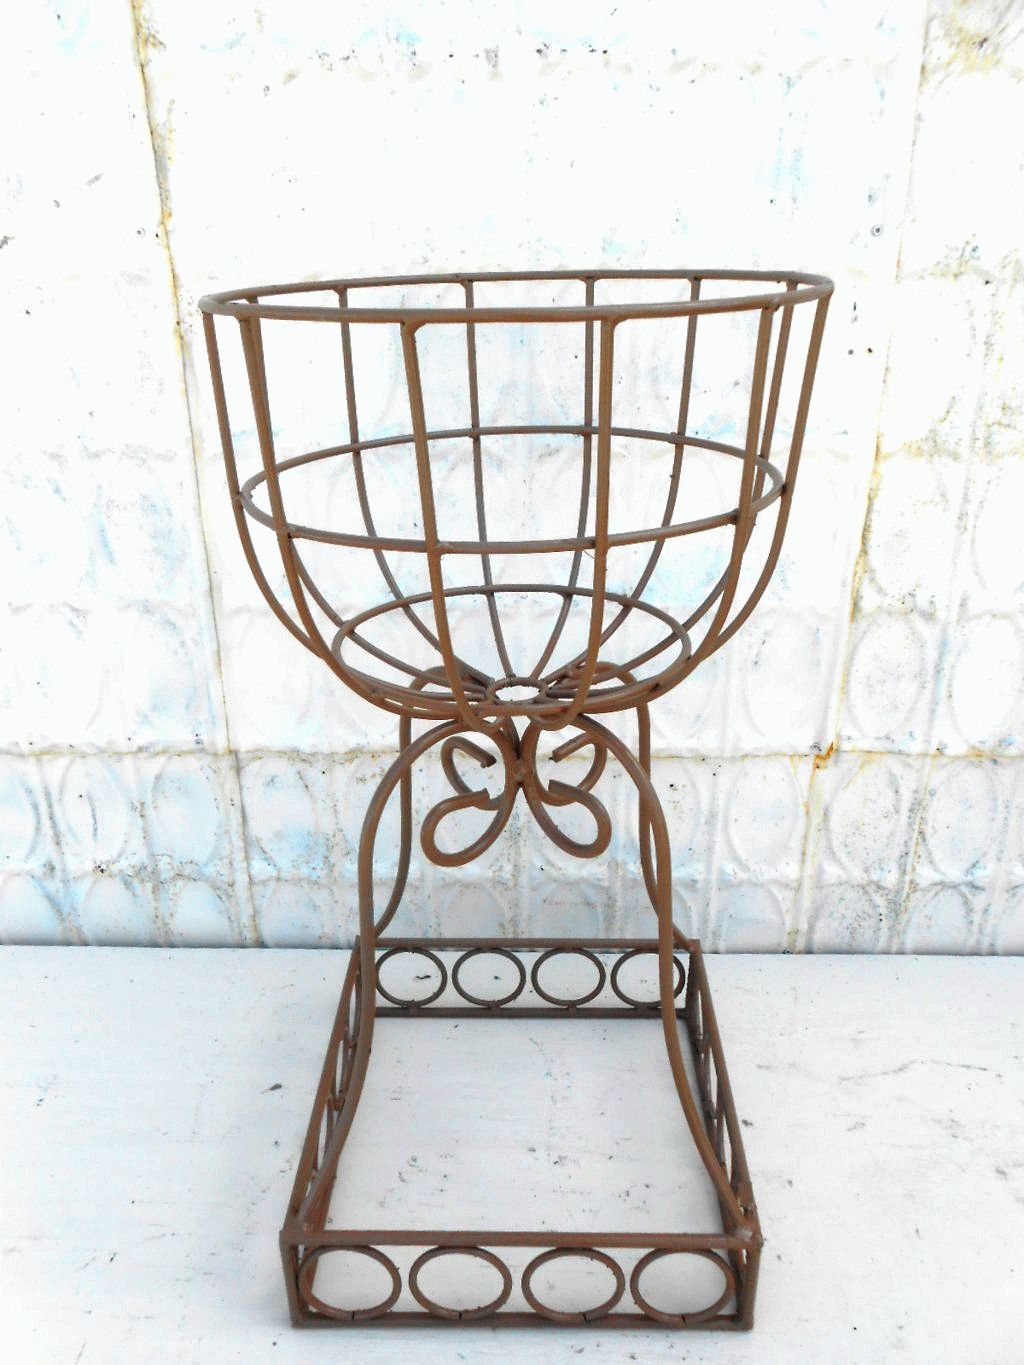 Plant Stands With Flower Bowl Intended For Latest 29" Madeline Wrought Iron Bowl Plant Stand Decorative Container (View 5 of 15)